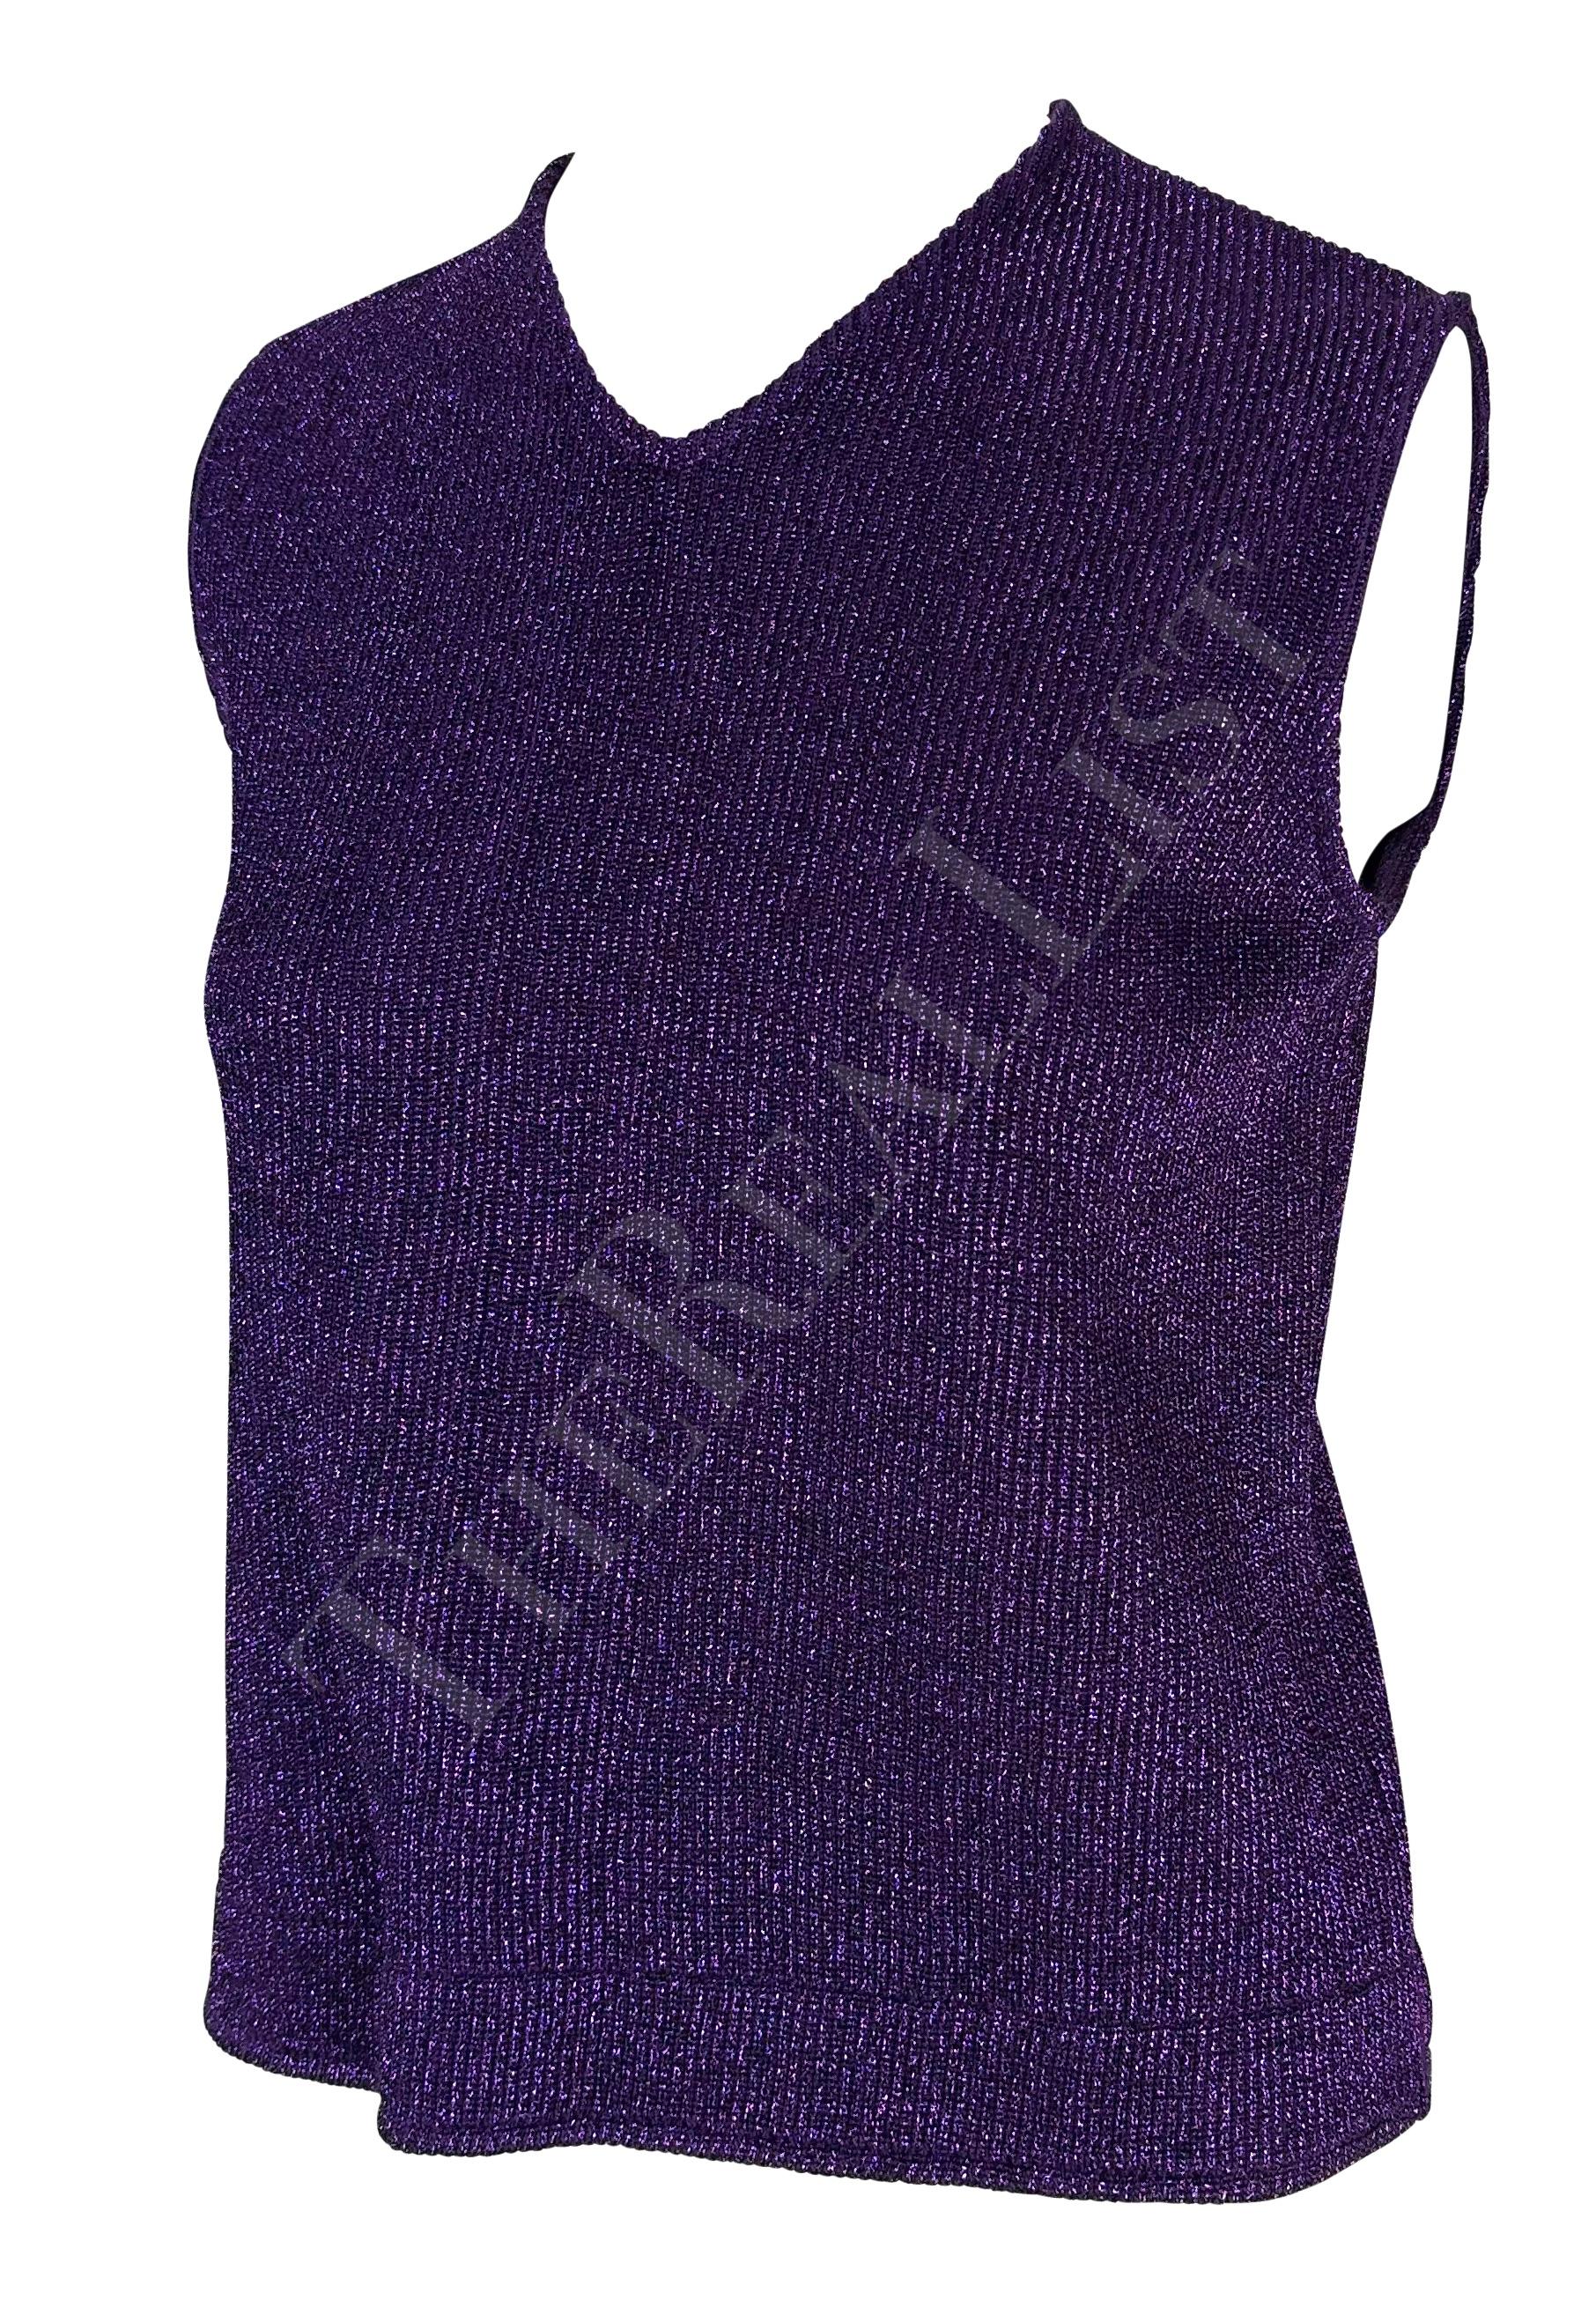 F/W 1996 Salvatore Ferragamo Purple Metallic Knit Sleeveless Top In Excellent Condition For Sale In West Hollywood, CA